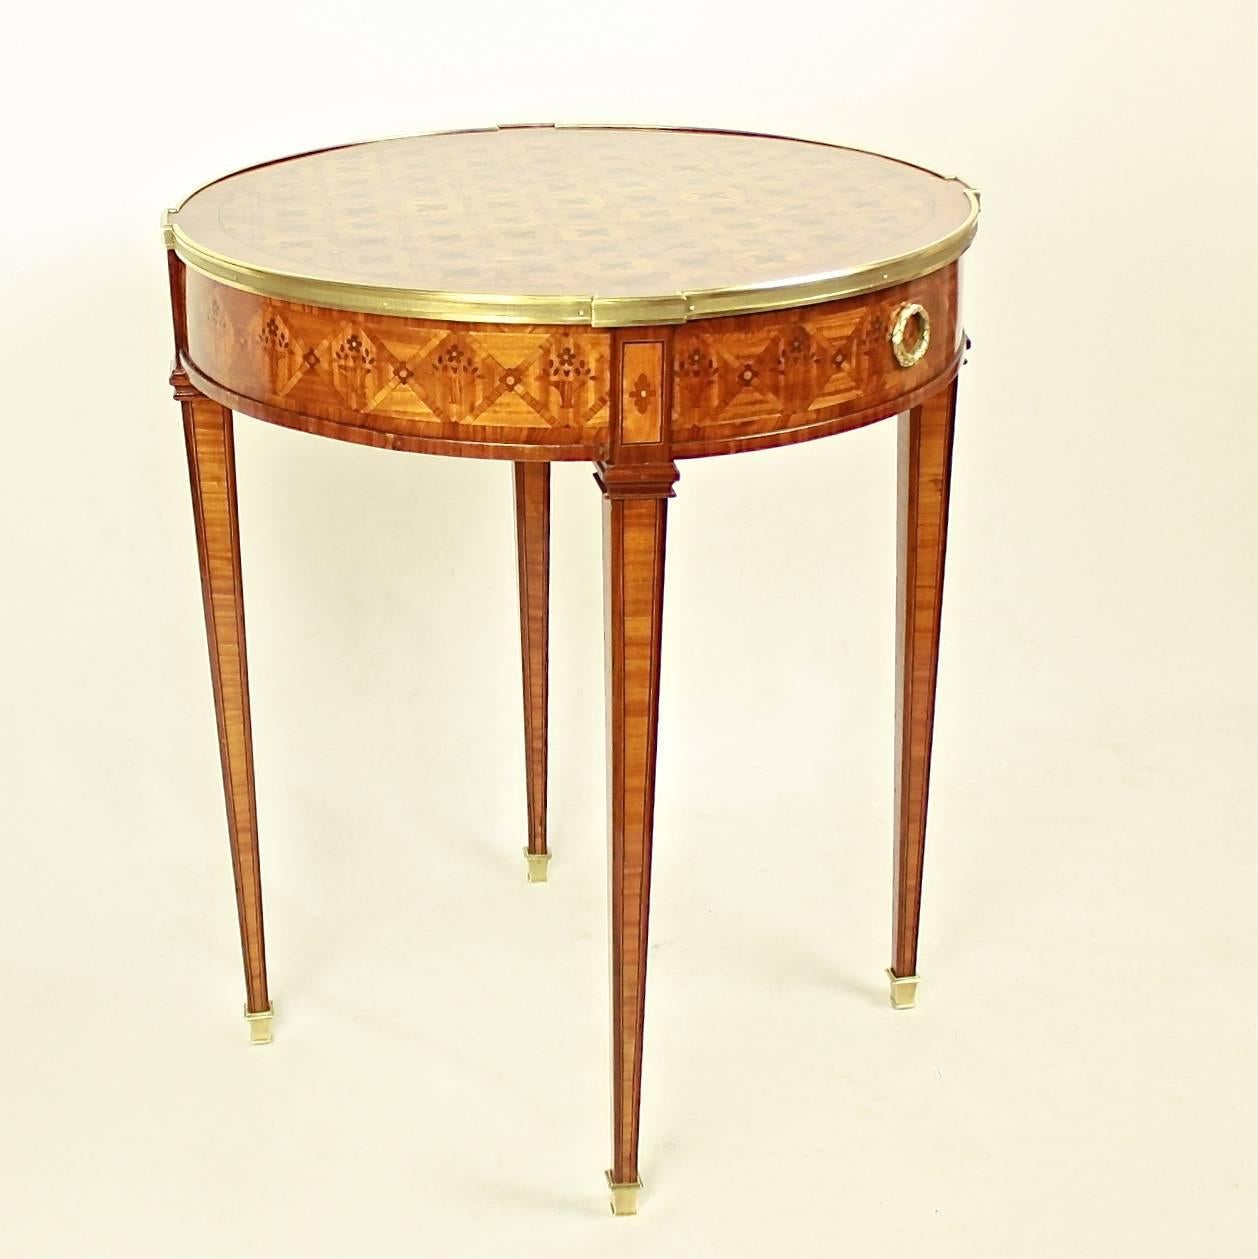 A 19th century marquetry gueridon table, the circular top with 'a' la reine' marquetry framed by a gilt bronze 'mille raie' surround above a trellis frieze containing a drawer. The table is raised on four square crossbanded tapering legs with gilt